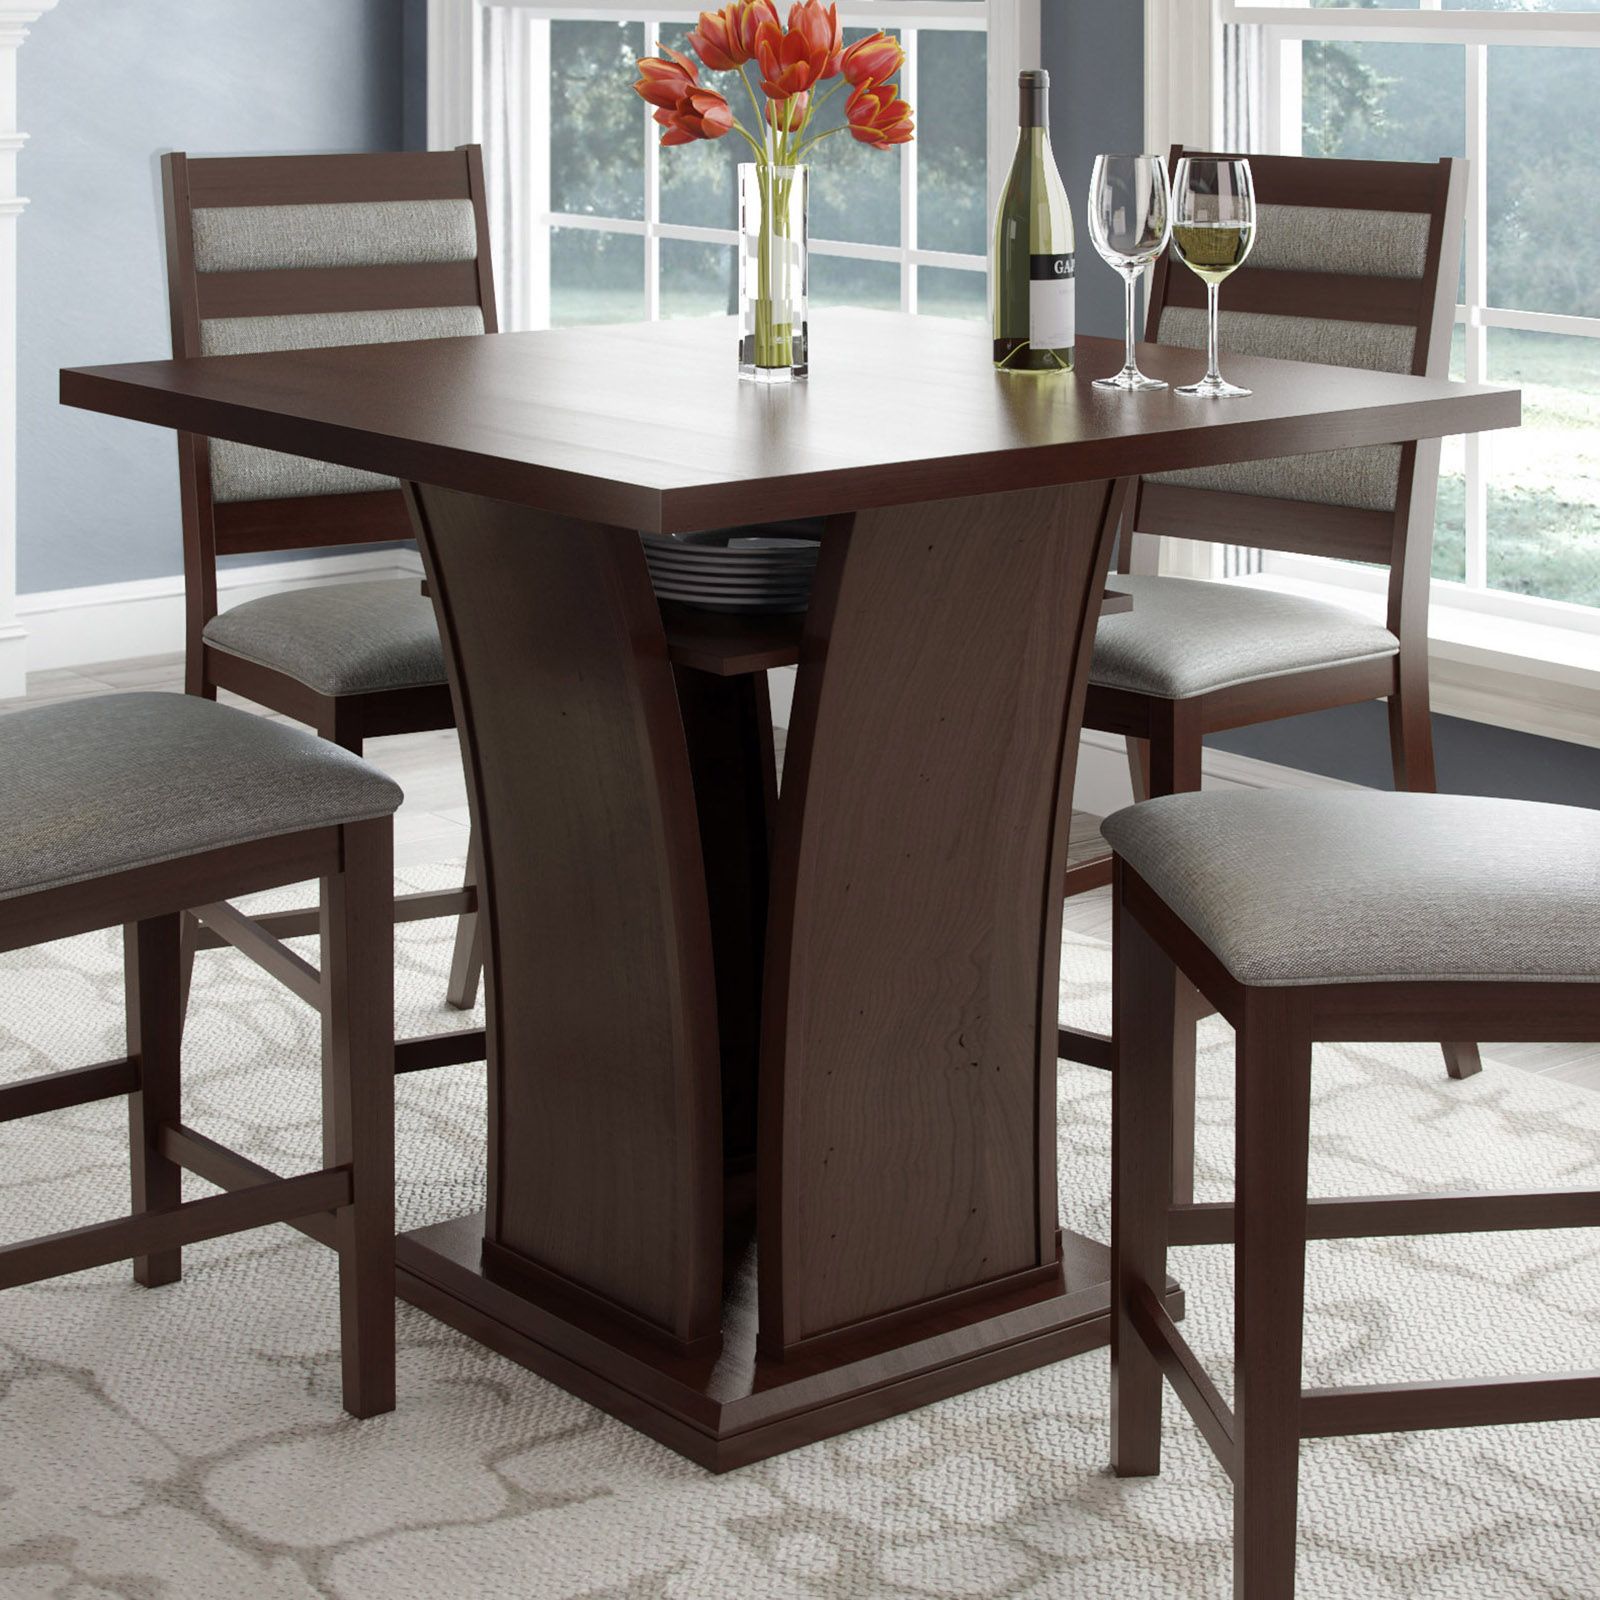 Corliving Bistro Counter Height Dining Table With Curved Pertaining To 2018 Liesel Bar Height Pedestal Dining Tables (View 10 of 15)